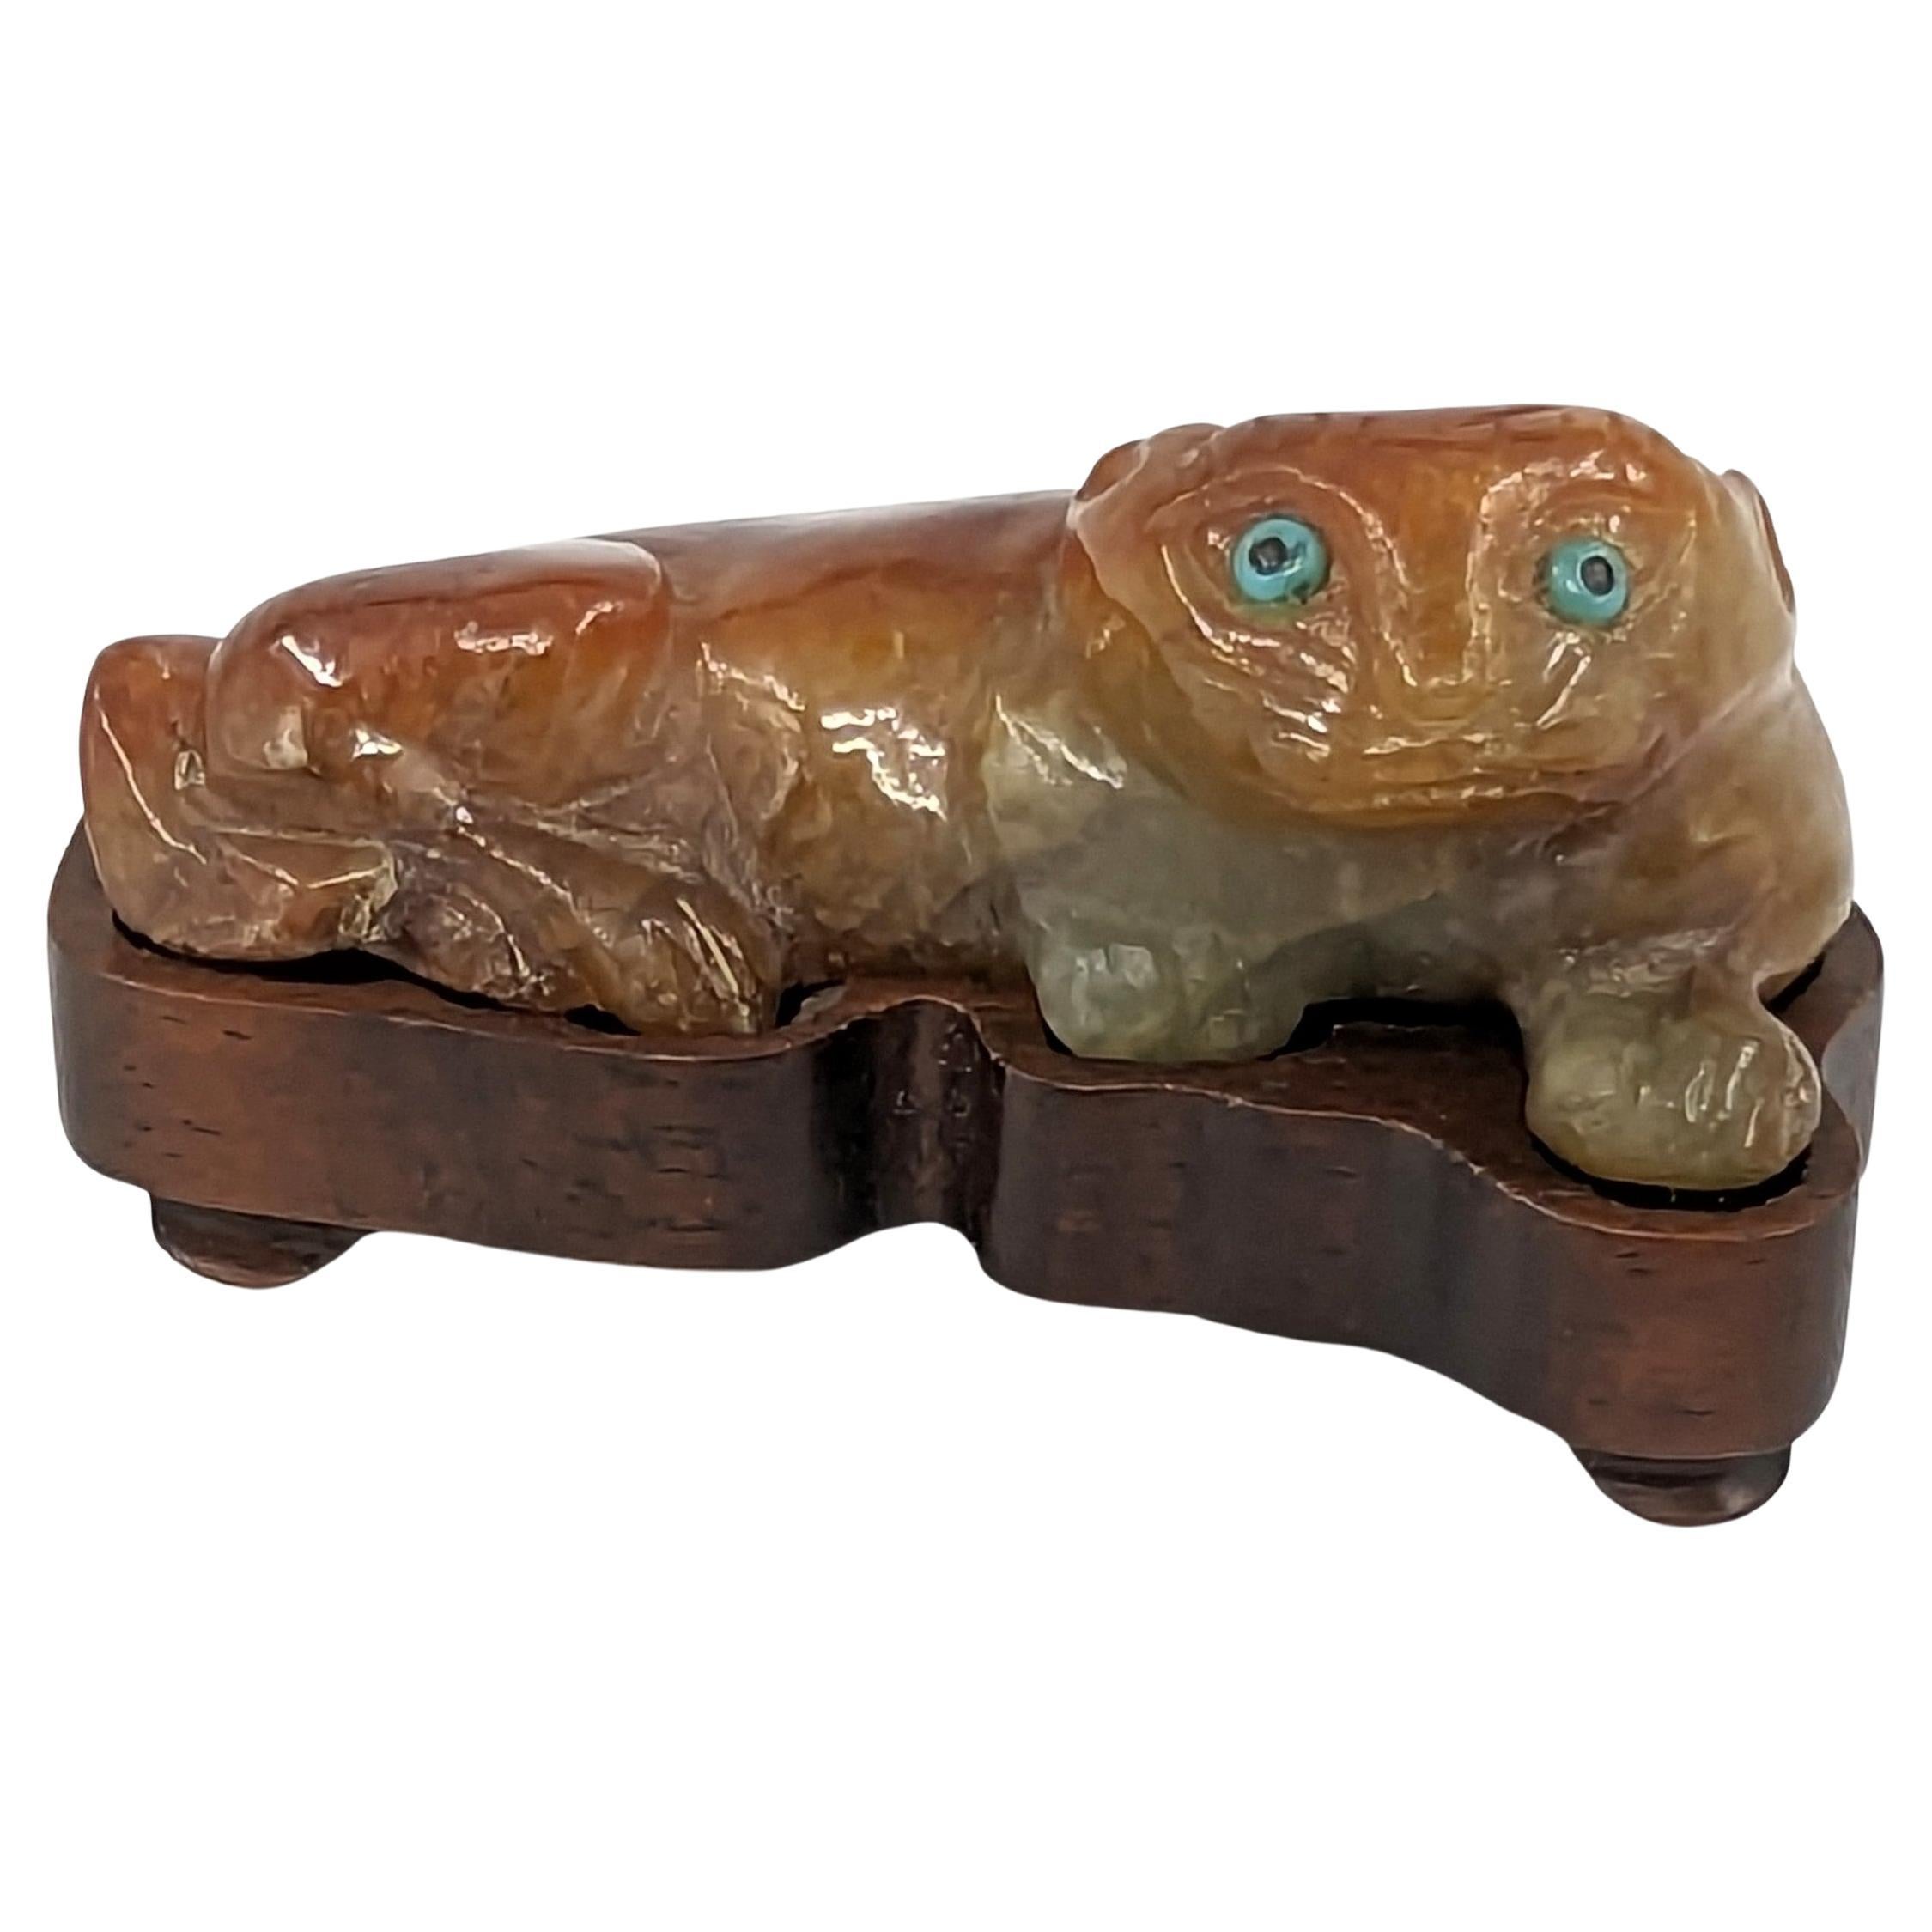 A wonderful and cute antique Chinese carved jadeite recumbent cat, comfortably nested in a matching hardwood stand. The almost fluffy looking cat's intense greenish blue eyes are inlaid with turquoise cabochons with black dot centres, and has a tail